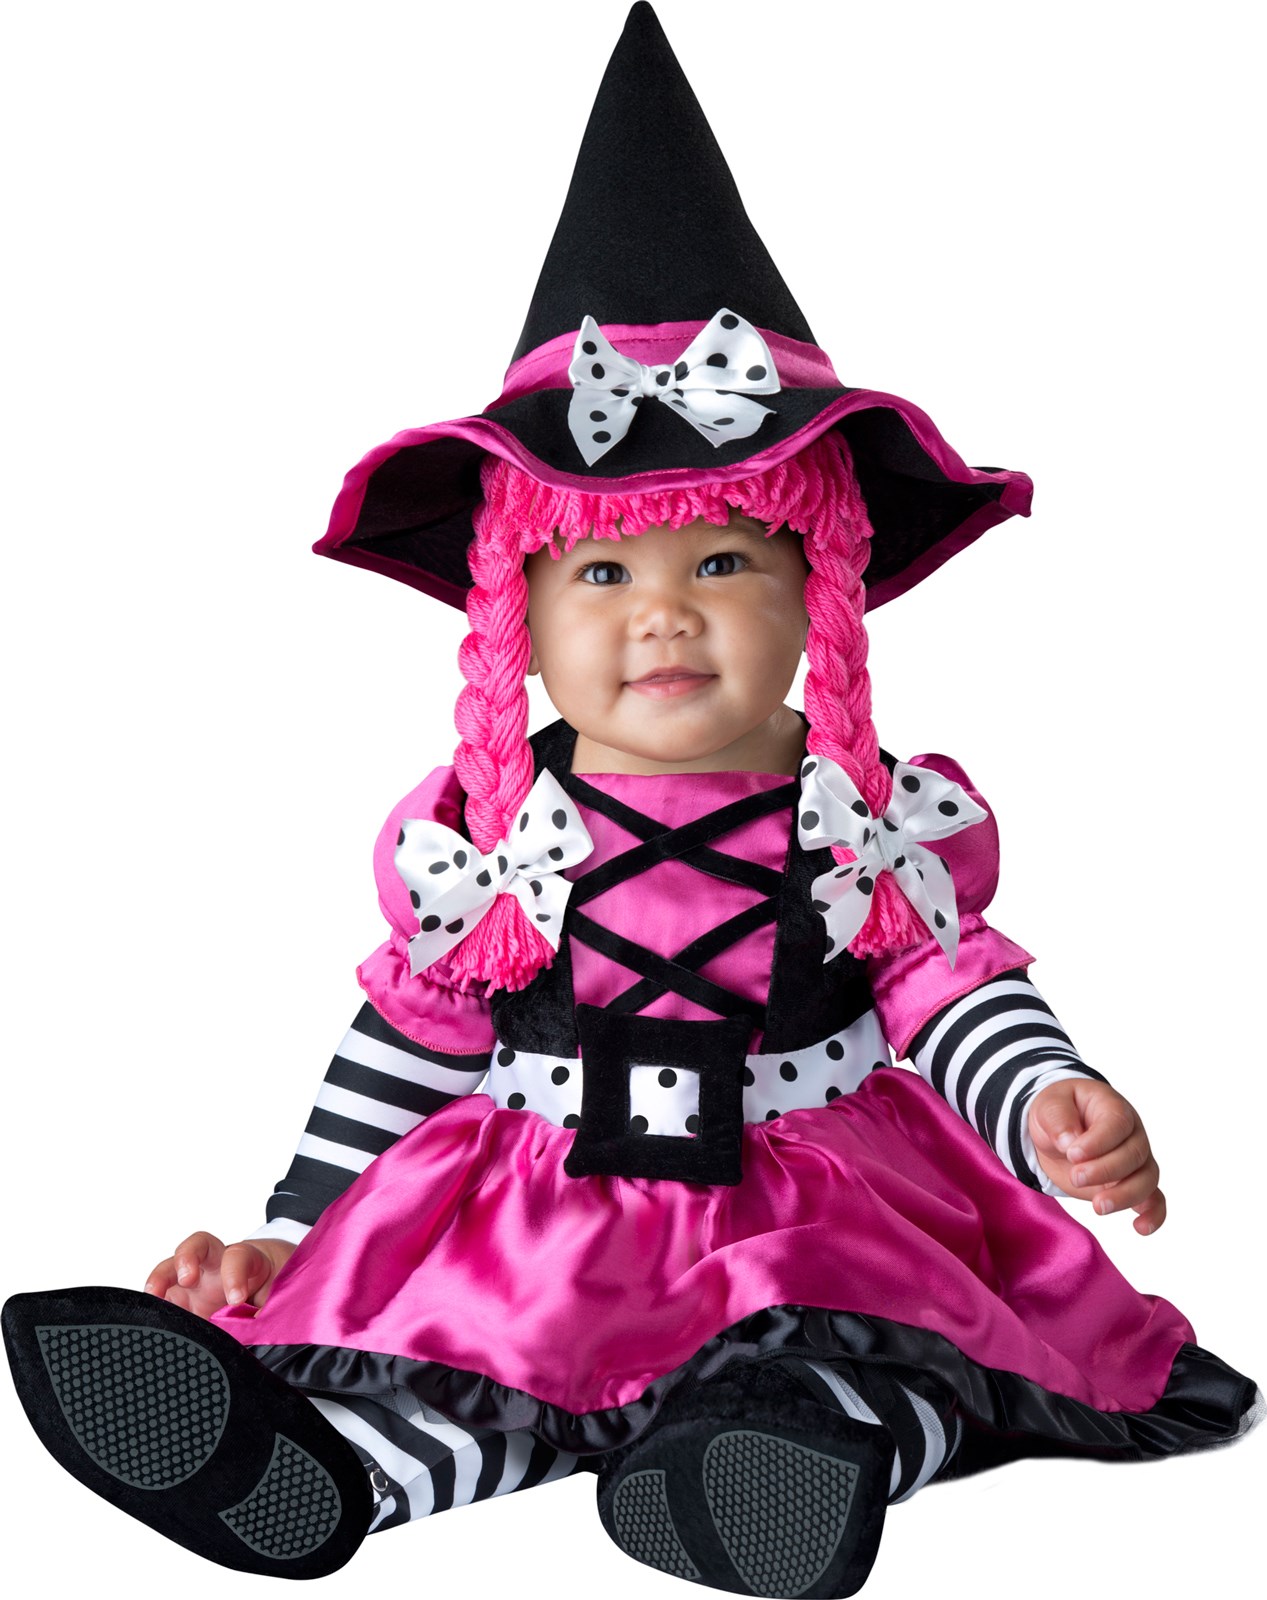 Wee Witch Baby Costume